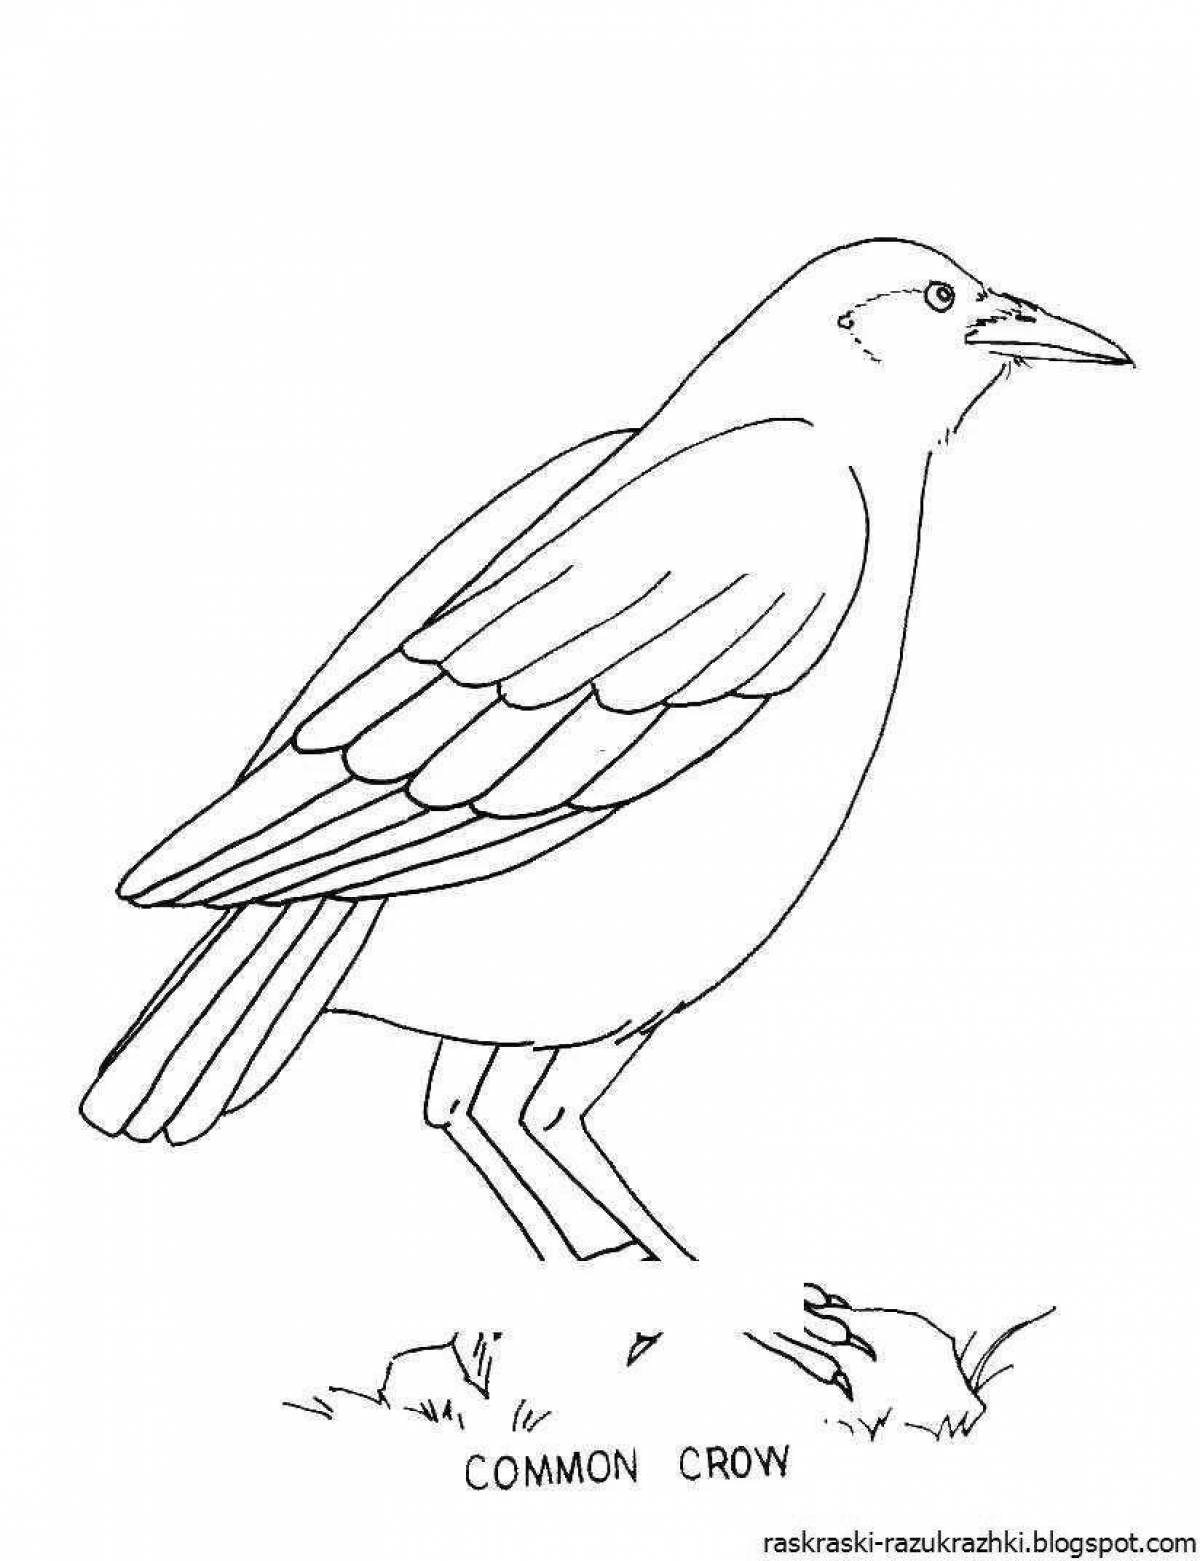 Living crow coloring book for children 6-7 years old